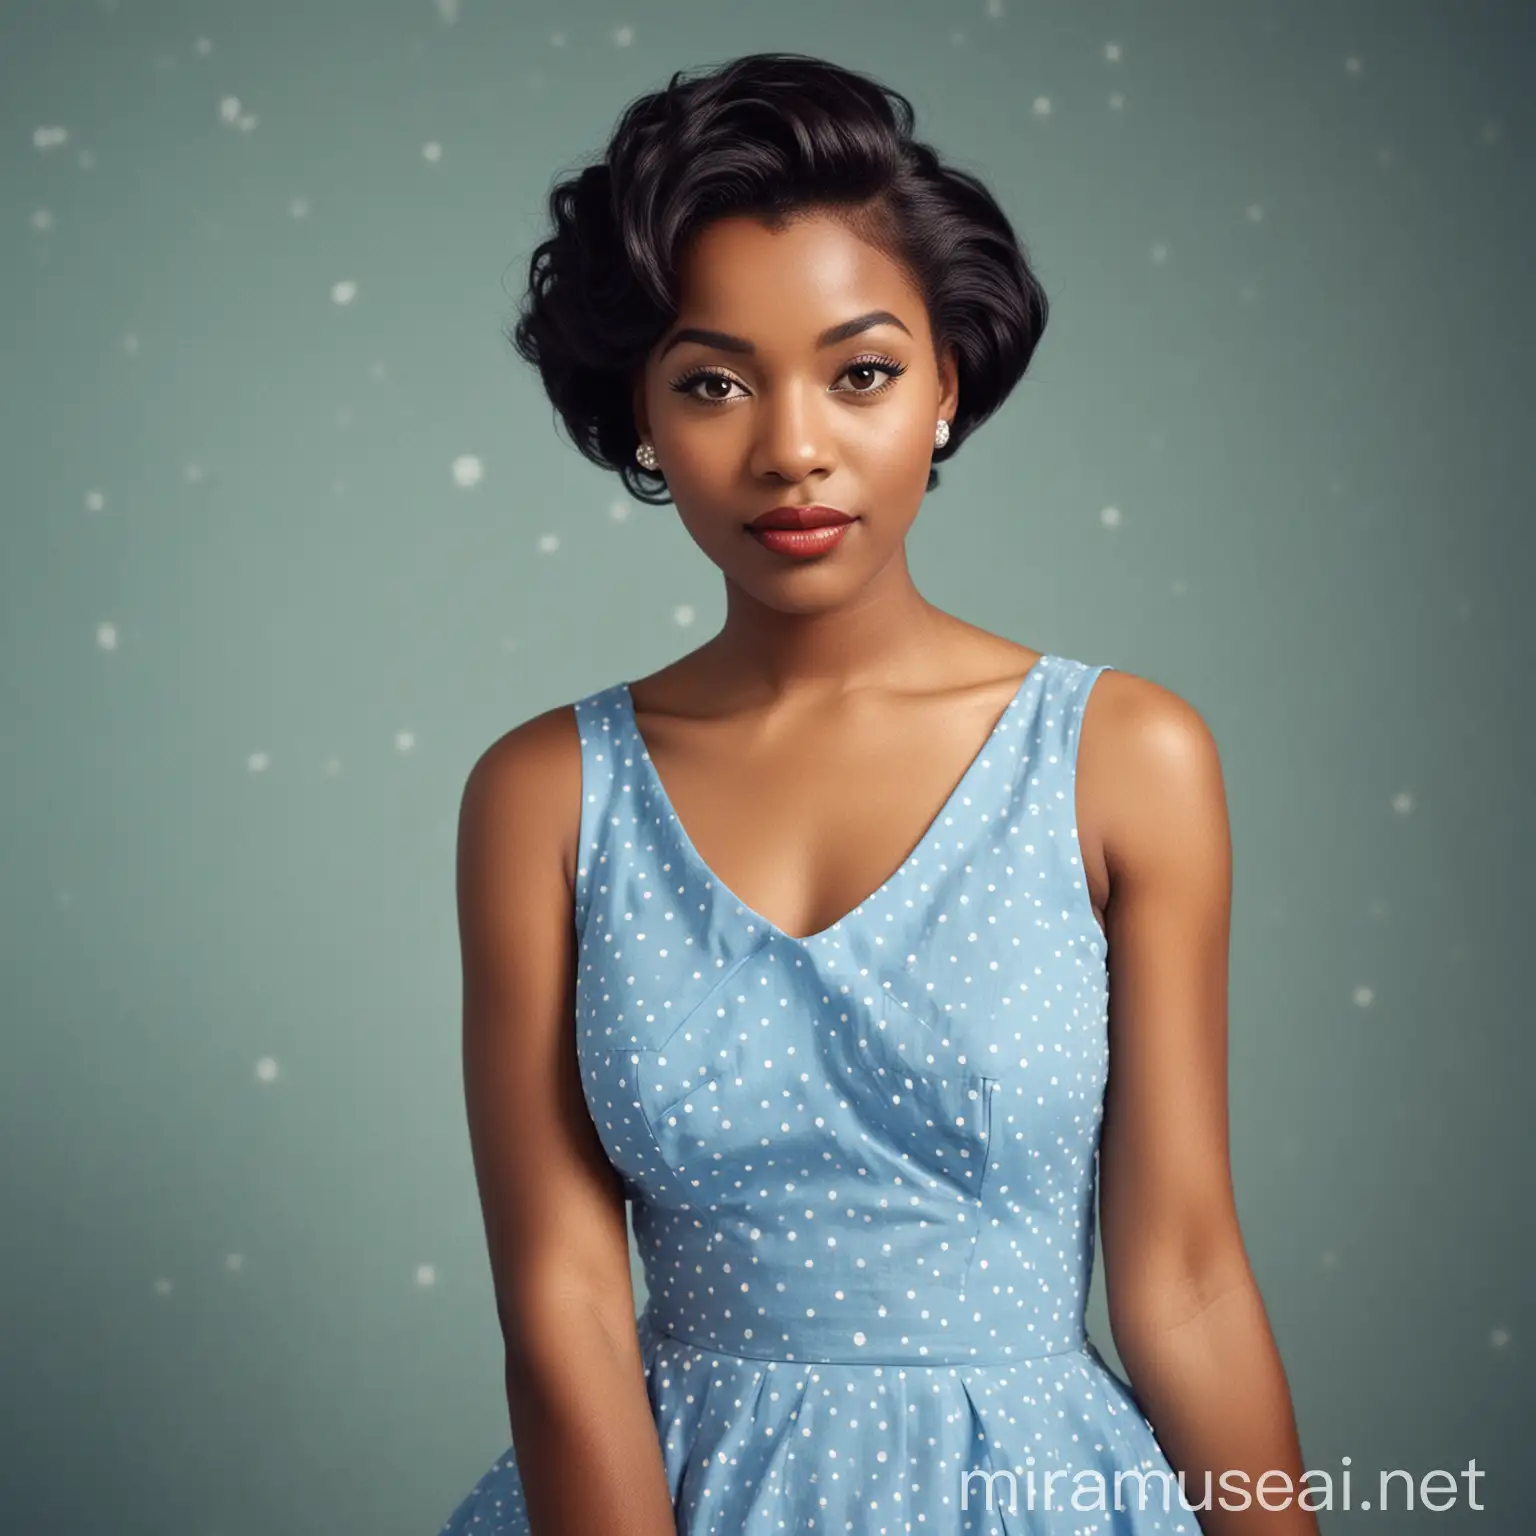 Stylish Black Woman with Short Hair in 1950s Blue Dress